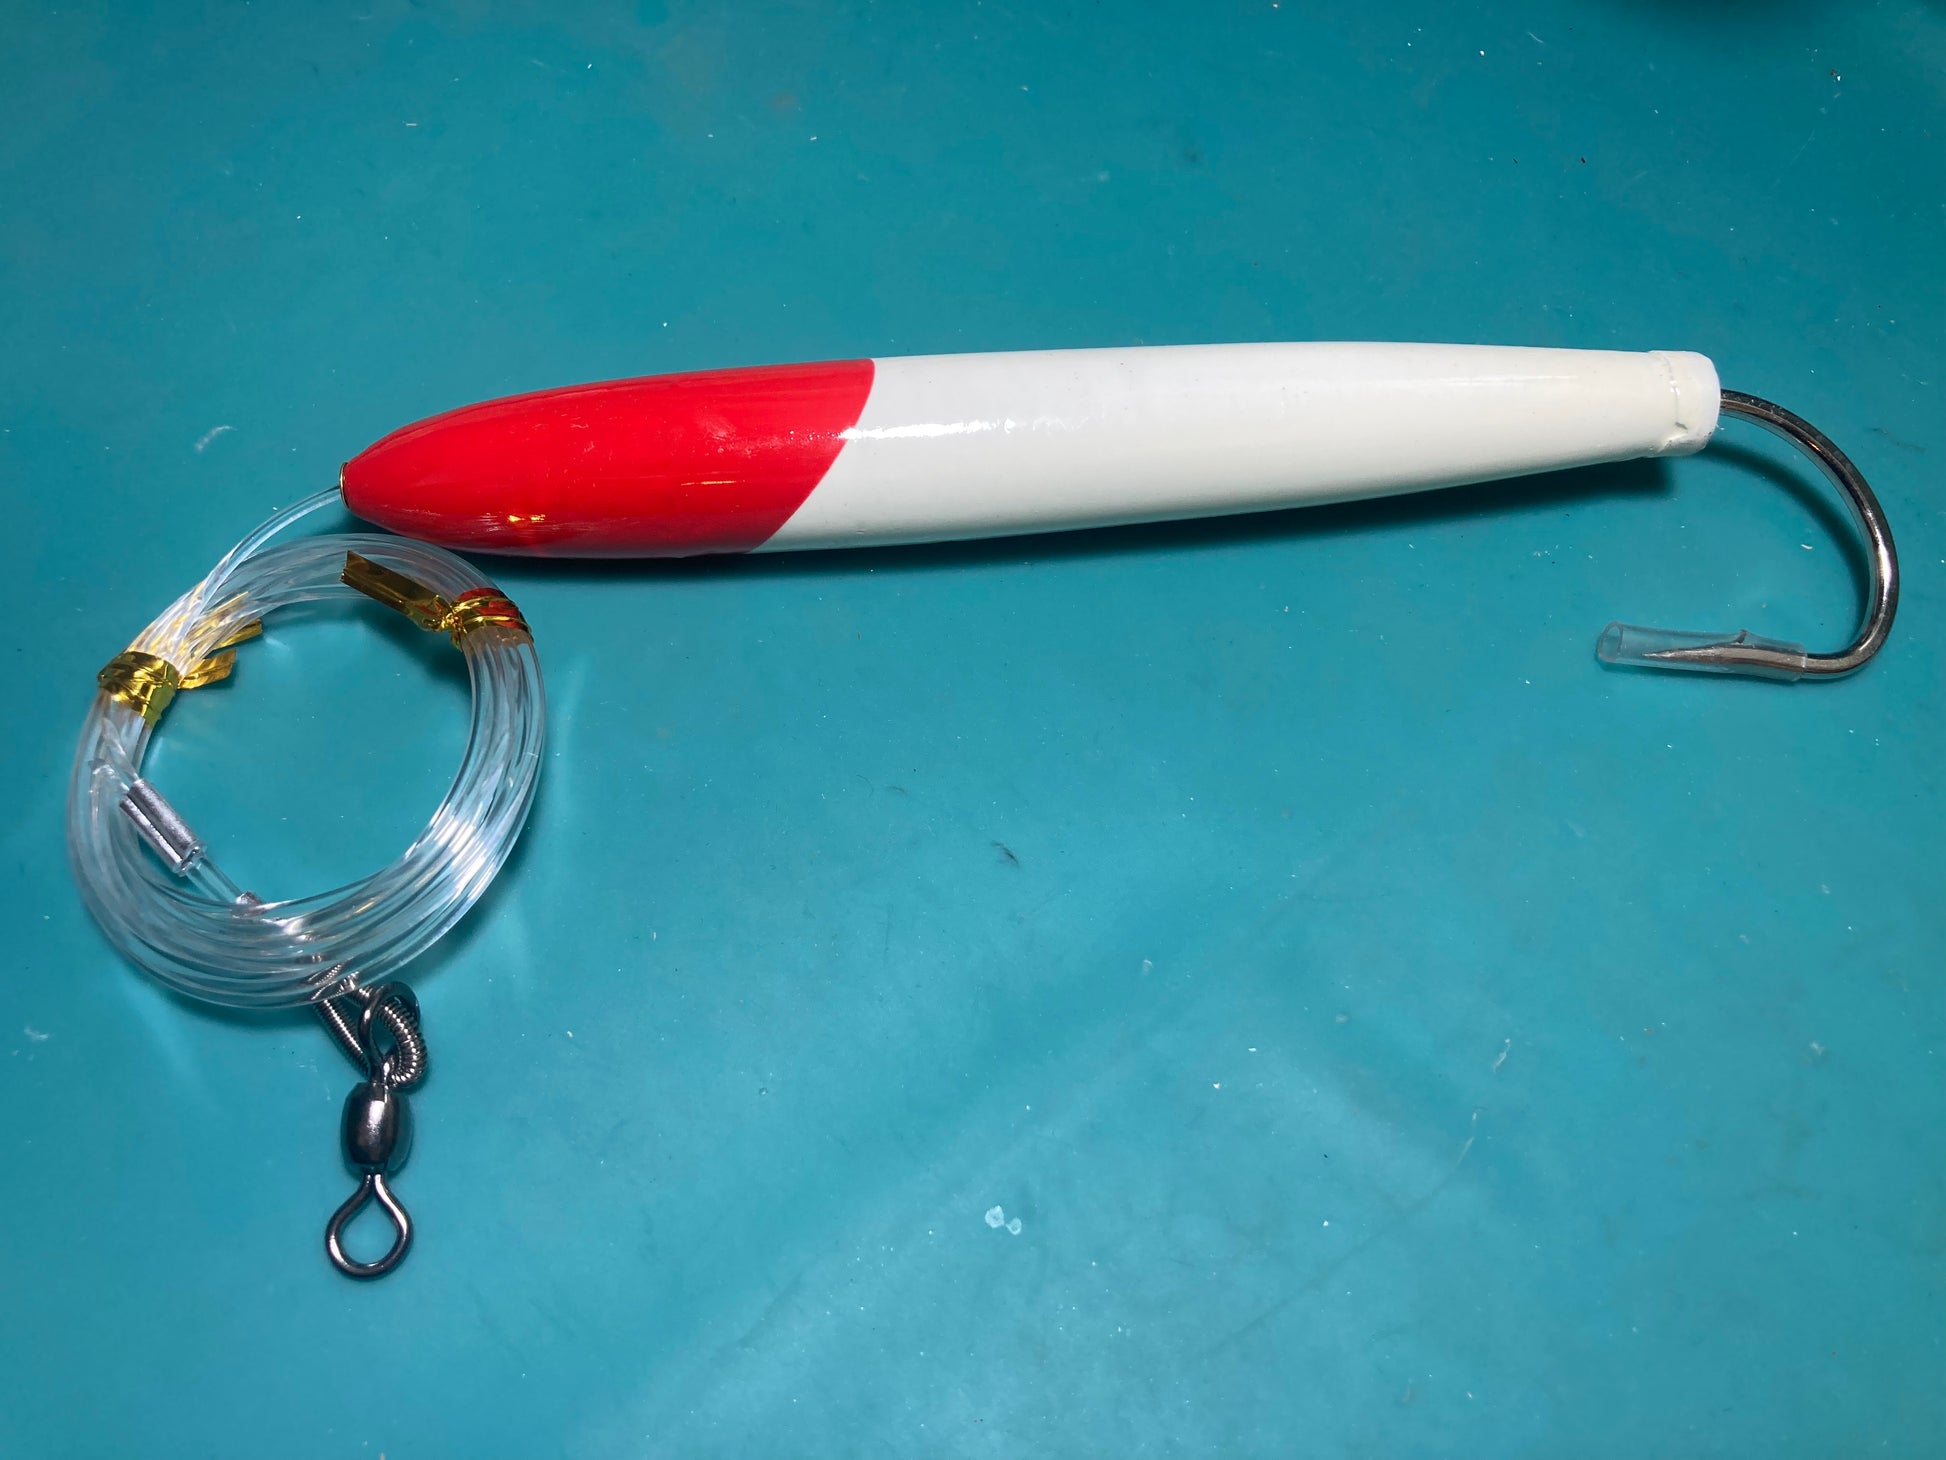 Cedar Plug 6” Trolling Lure Rigged and Ready to Fish